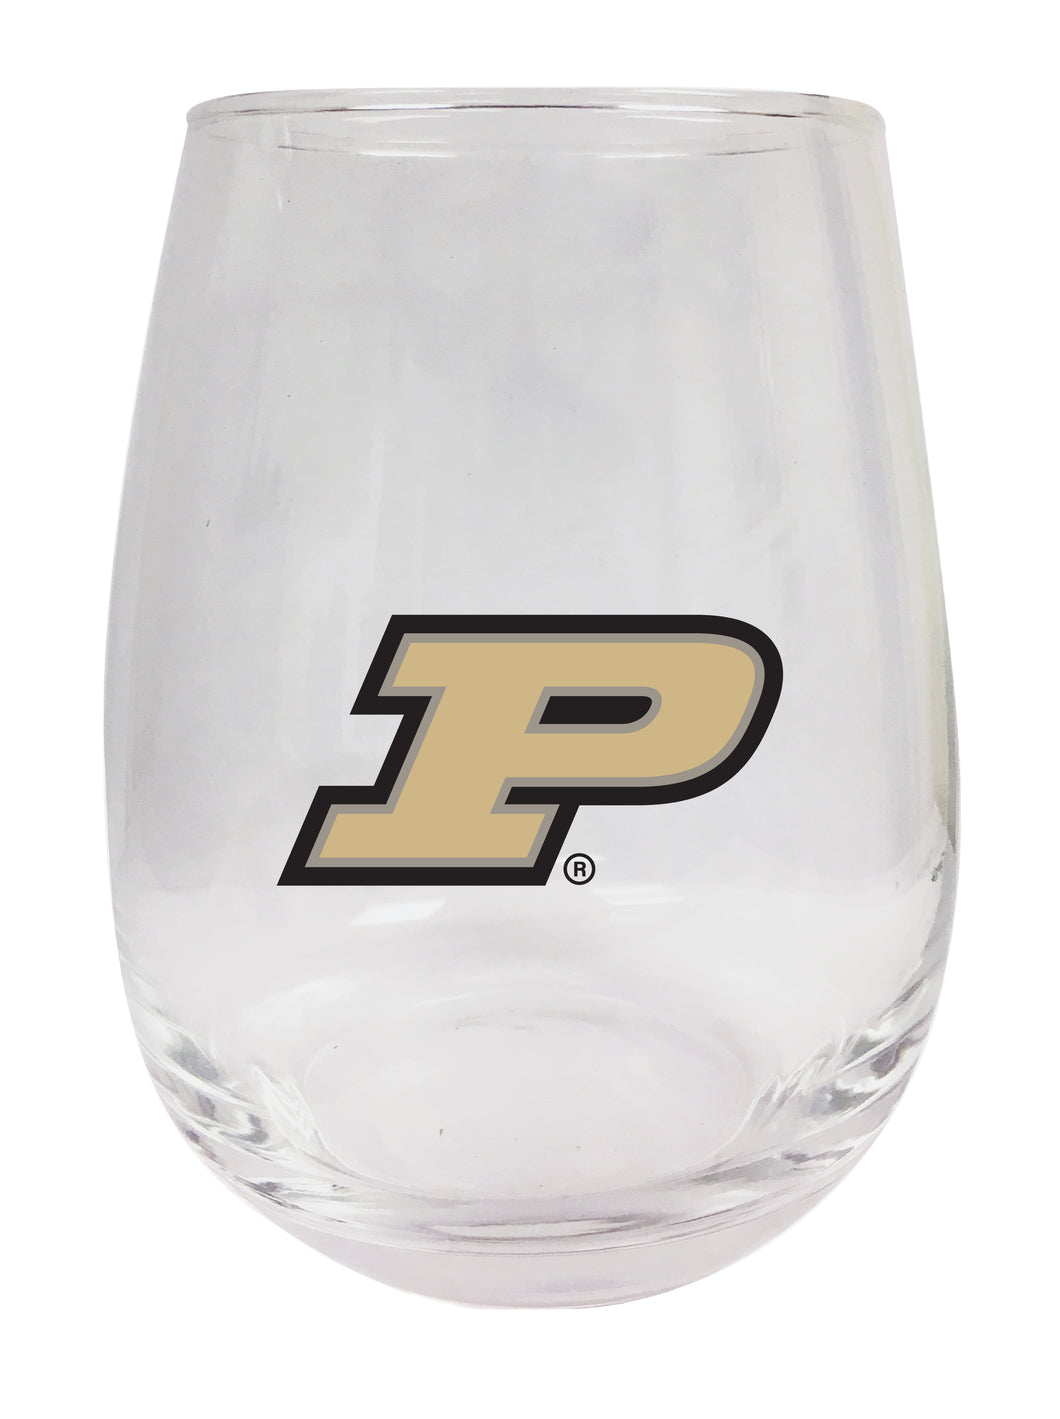 Purdue Boilermakers Stemless Wine Glass - 9 oz. | Officially Licensed NCAA Merchandise